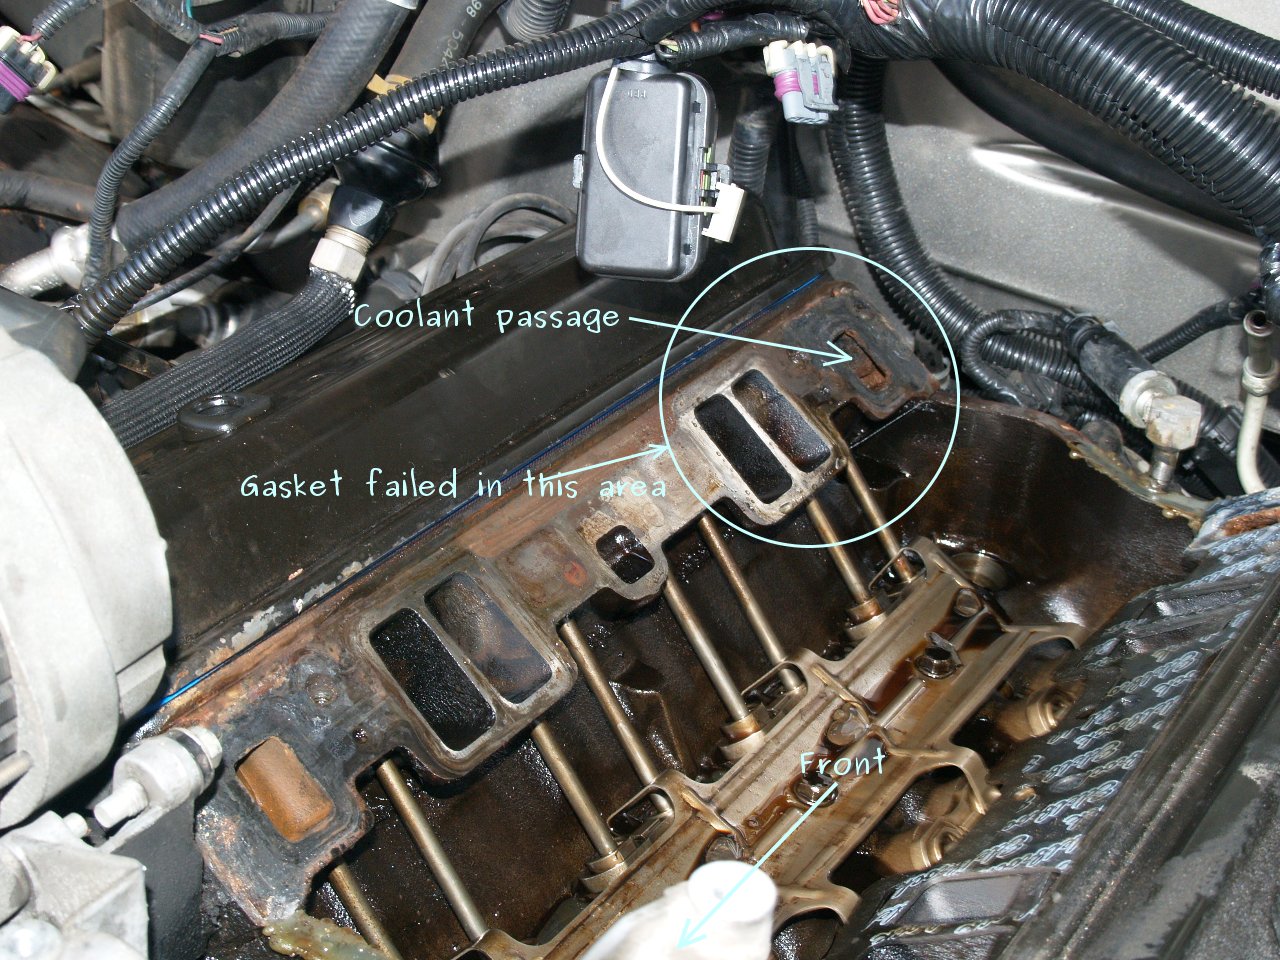 See P0832 in engine